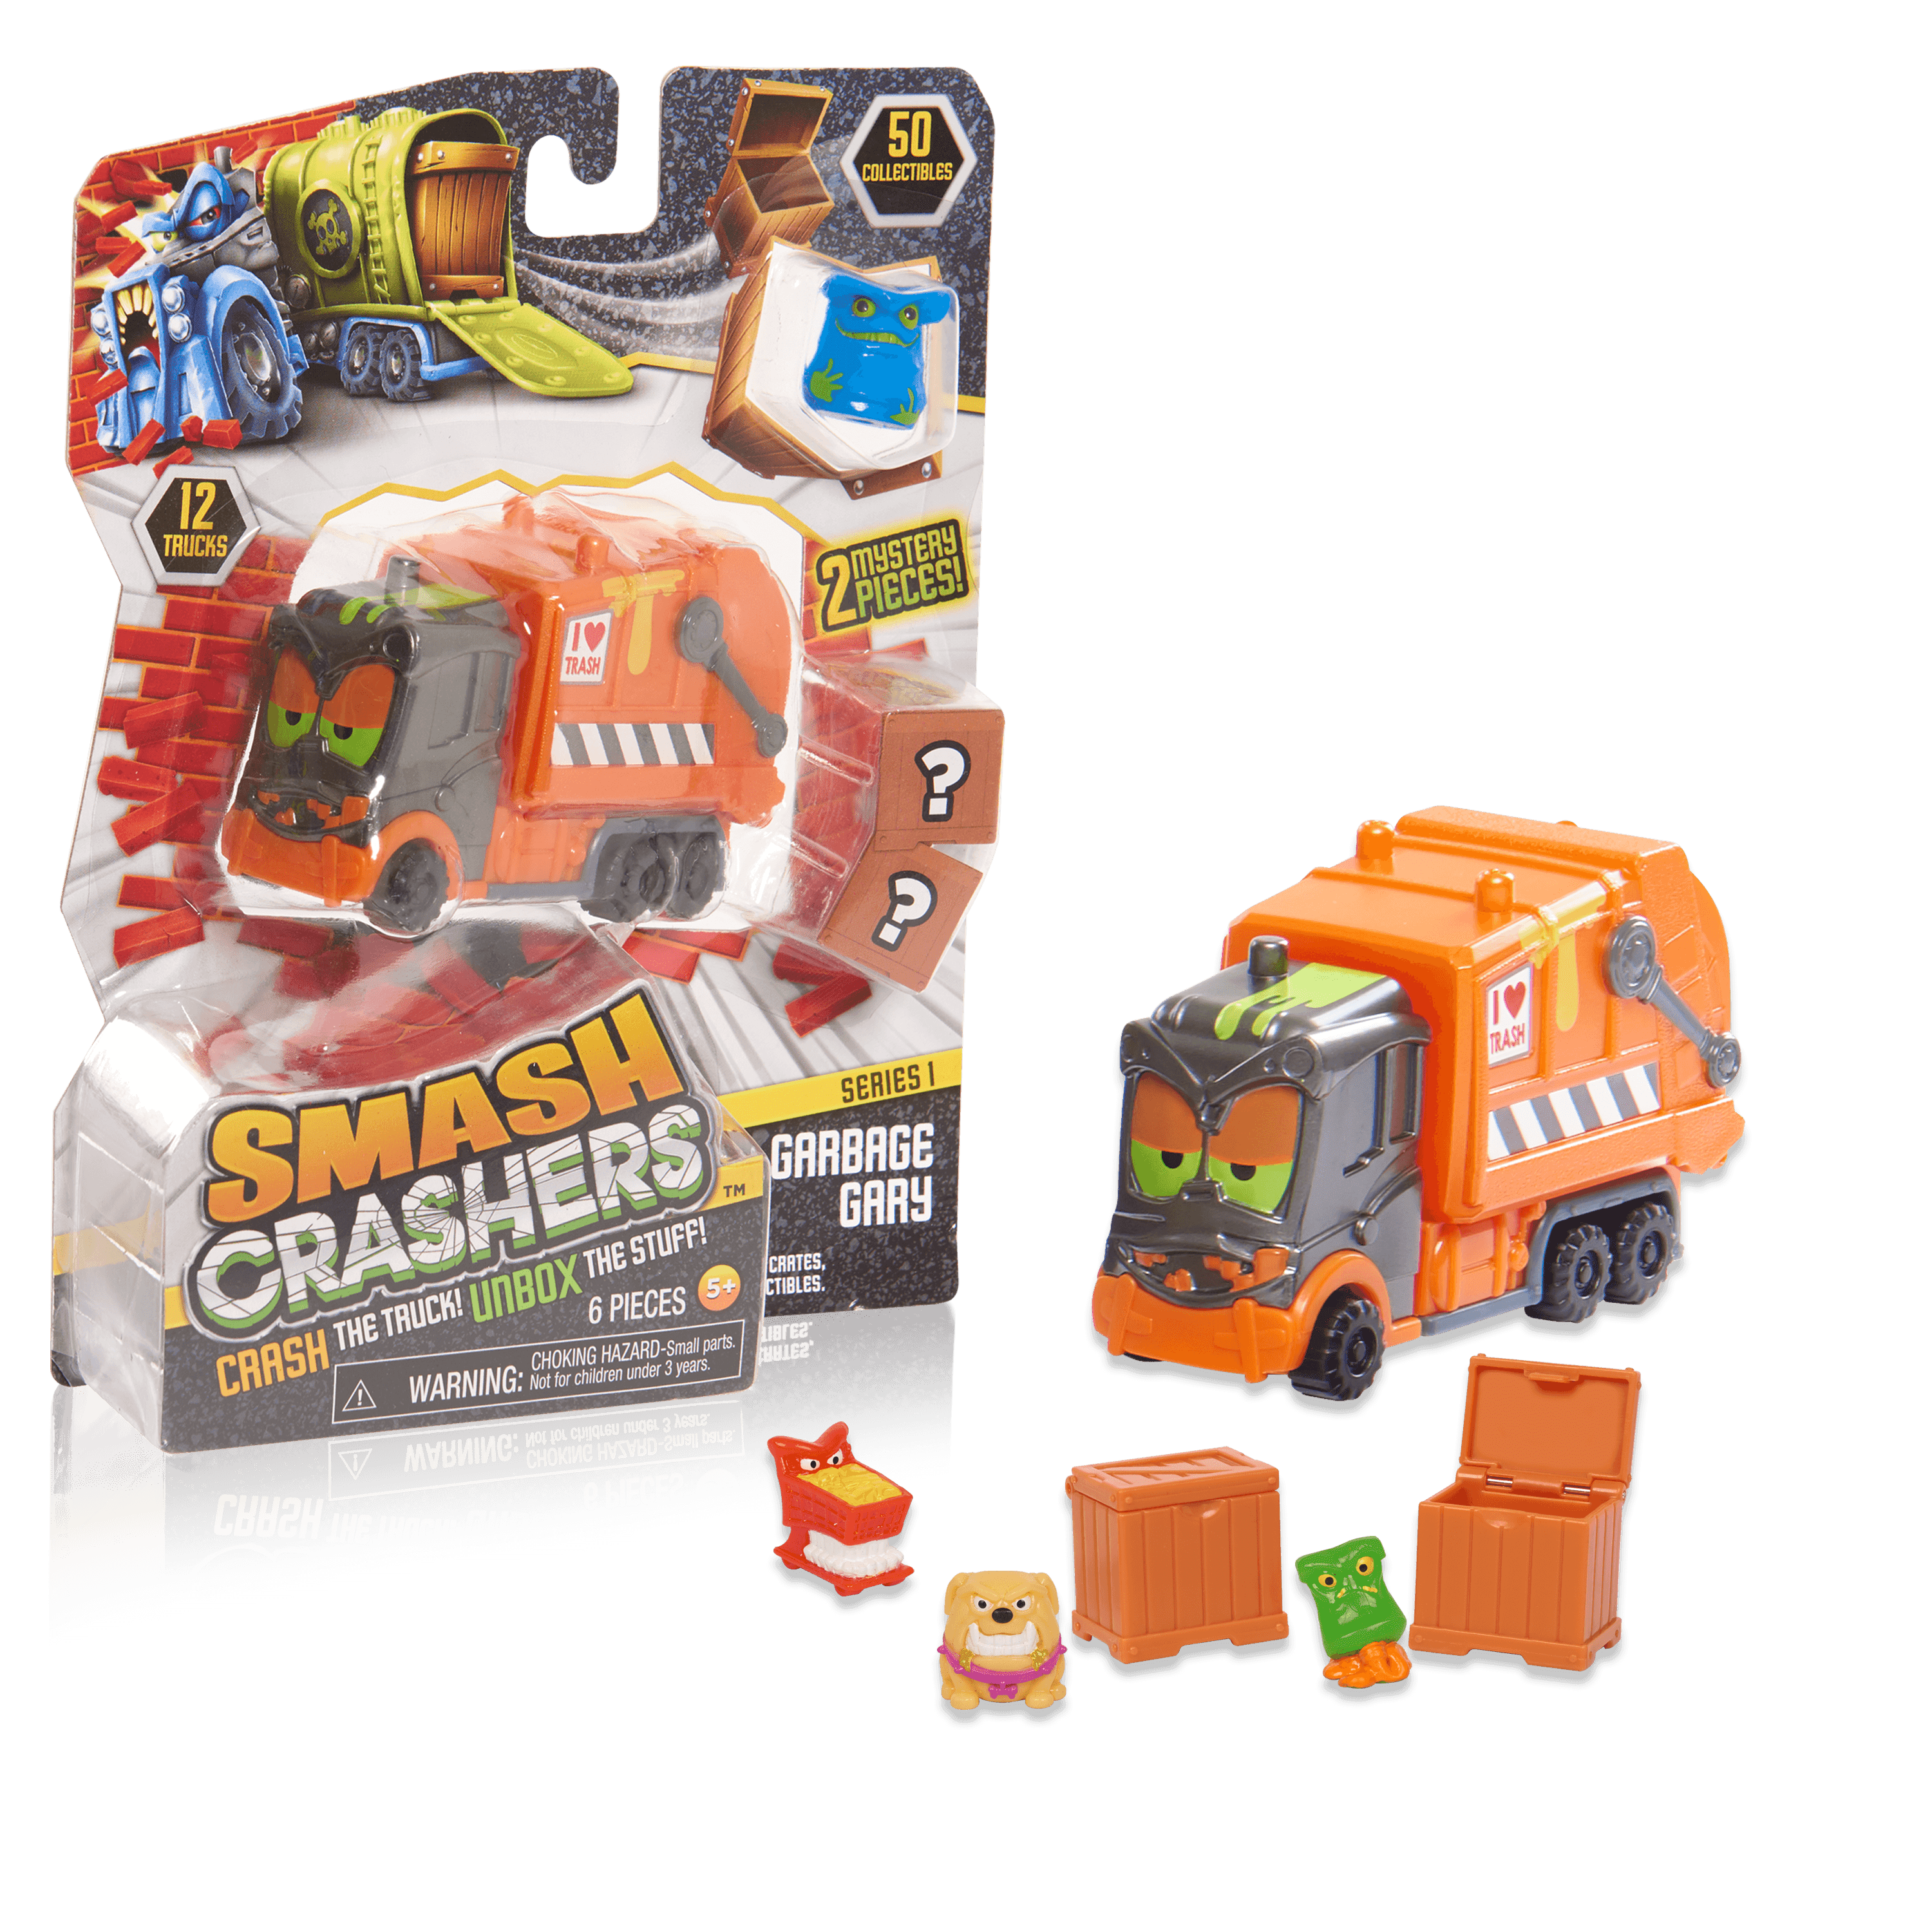 Smash Crashers Swill Bill Series 1 (Just Play) Collectible Toy Play Fun Kids